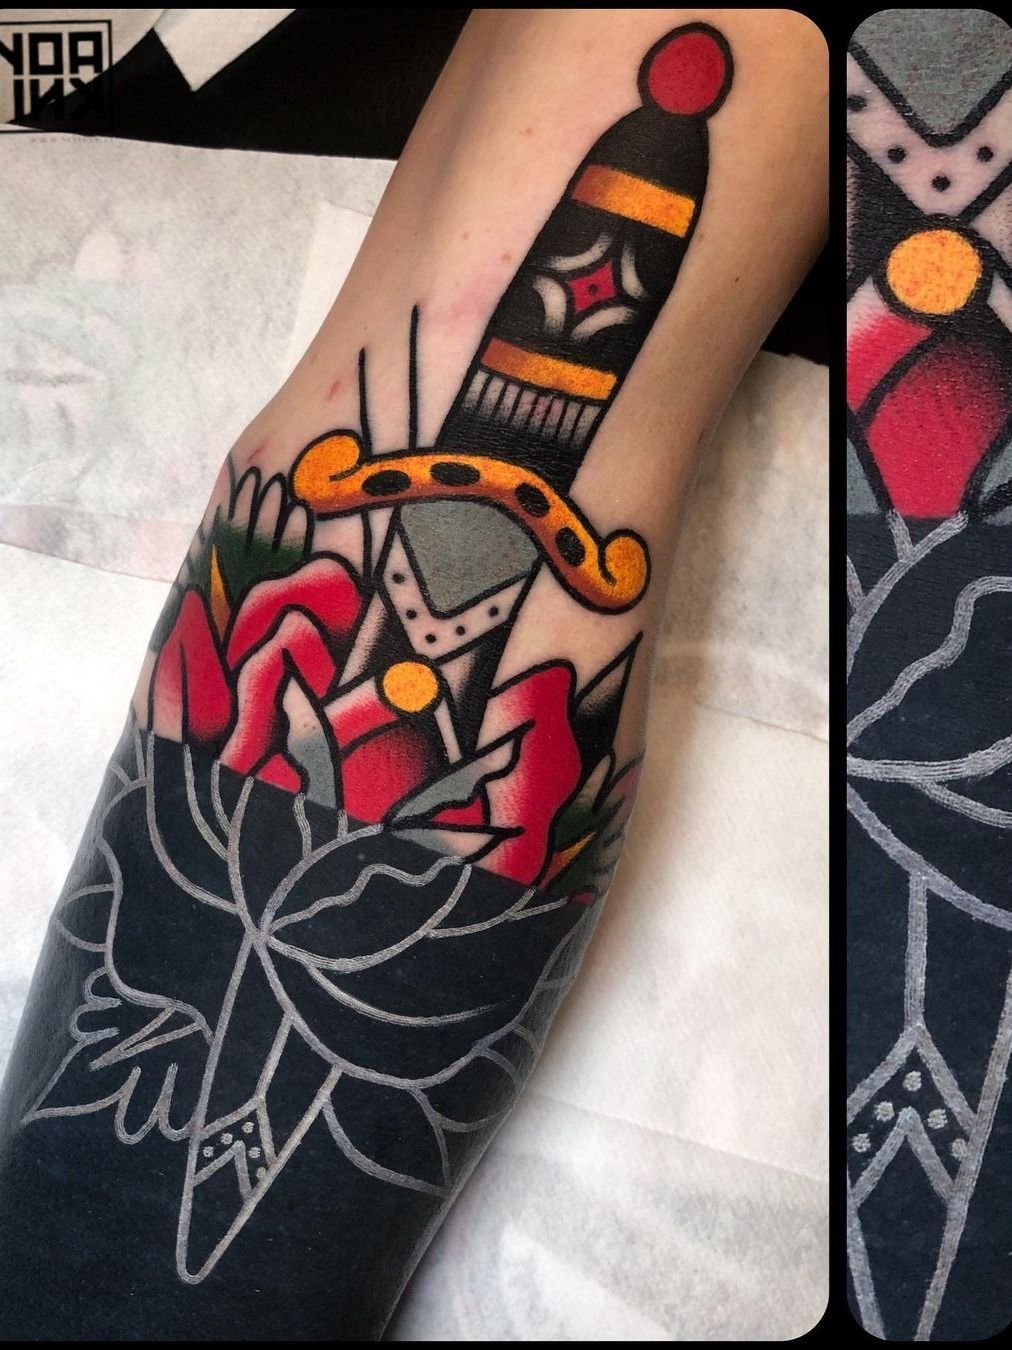 Red is the most risky ink color and other health issues from tattoos